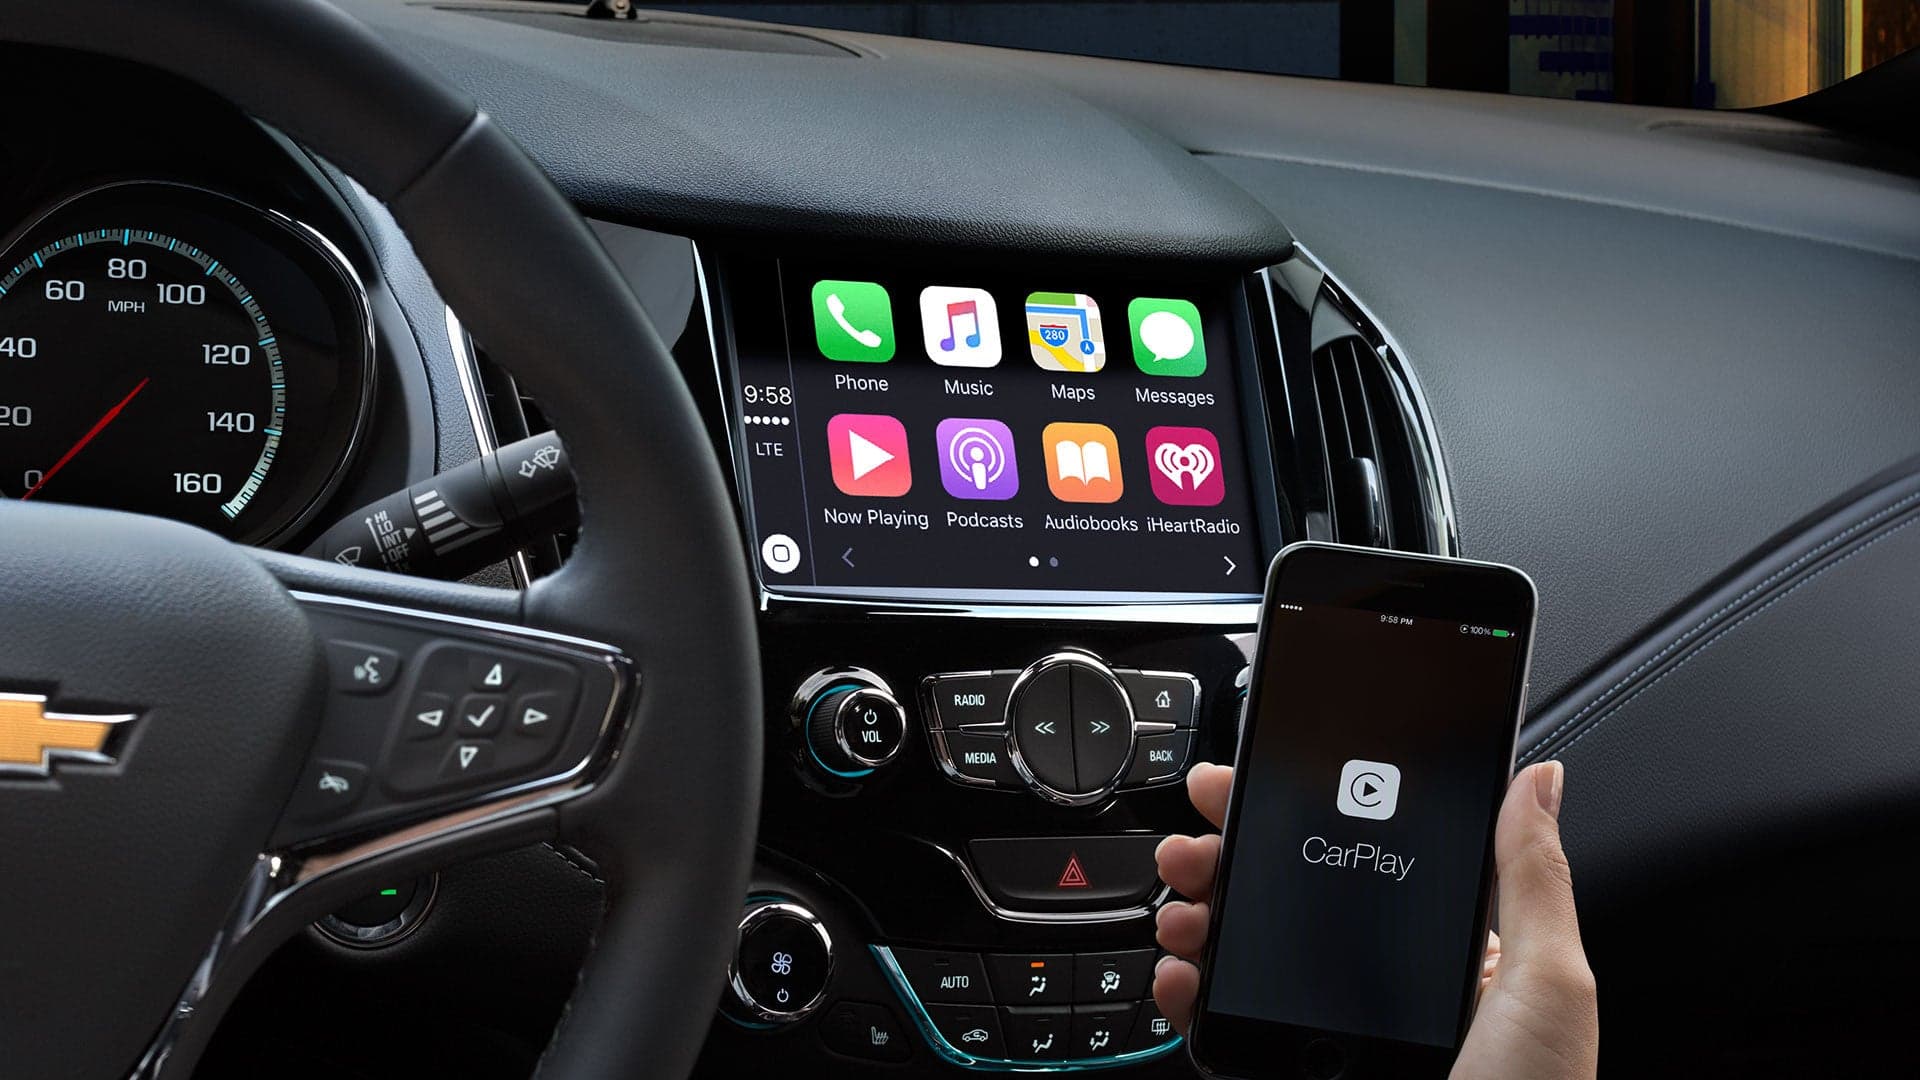 Infotainment Systems Are Causing More Crashes, AAA Says